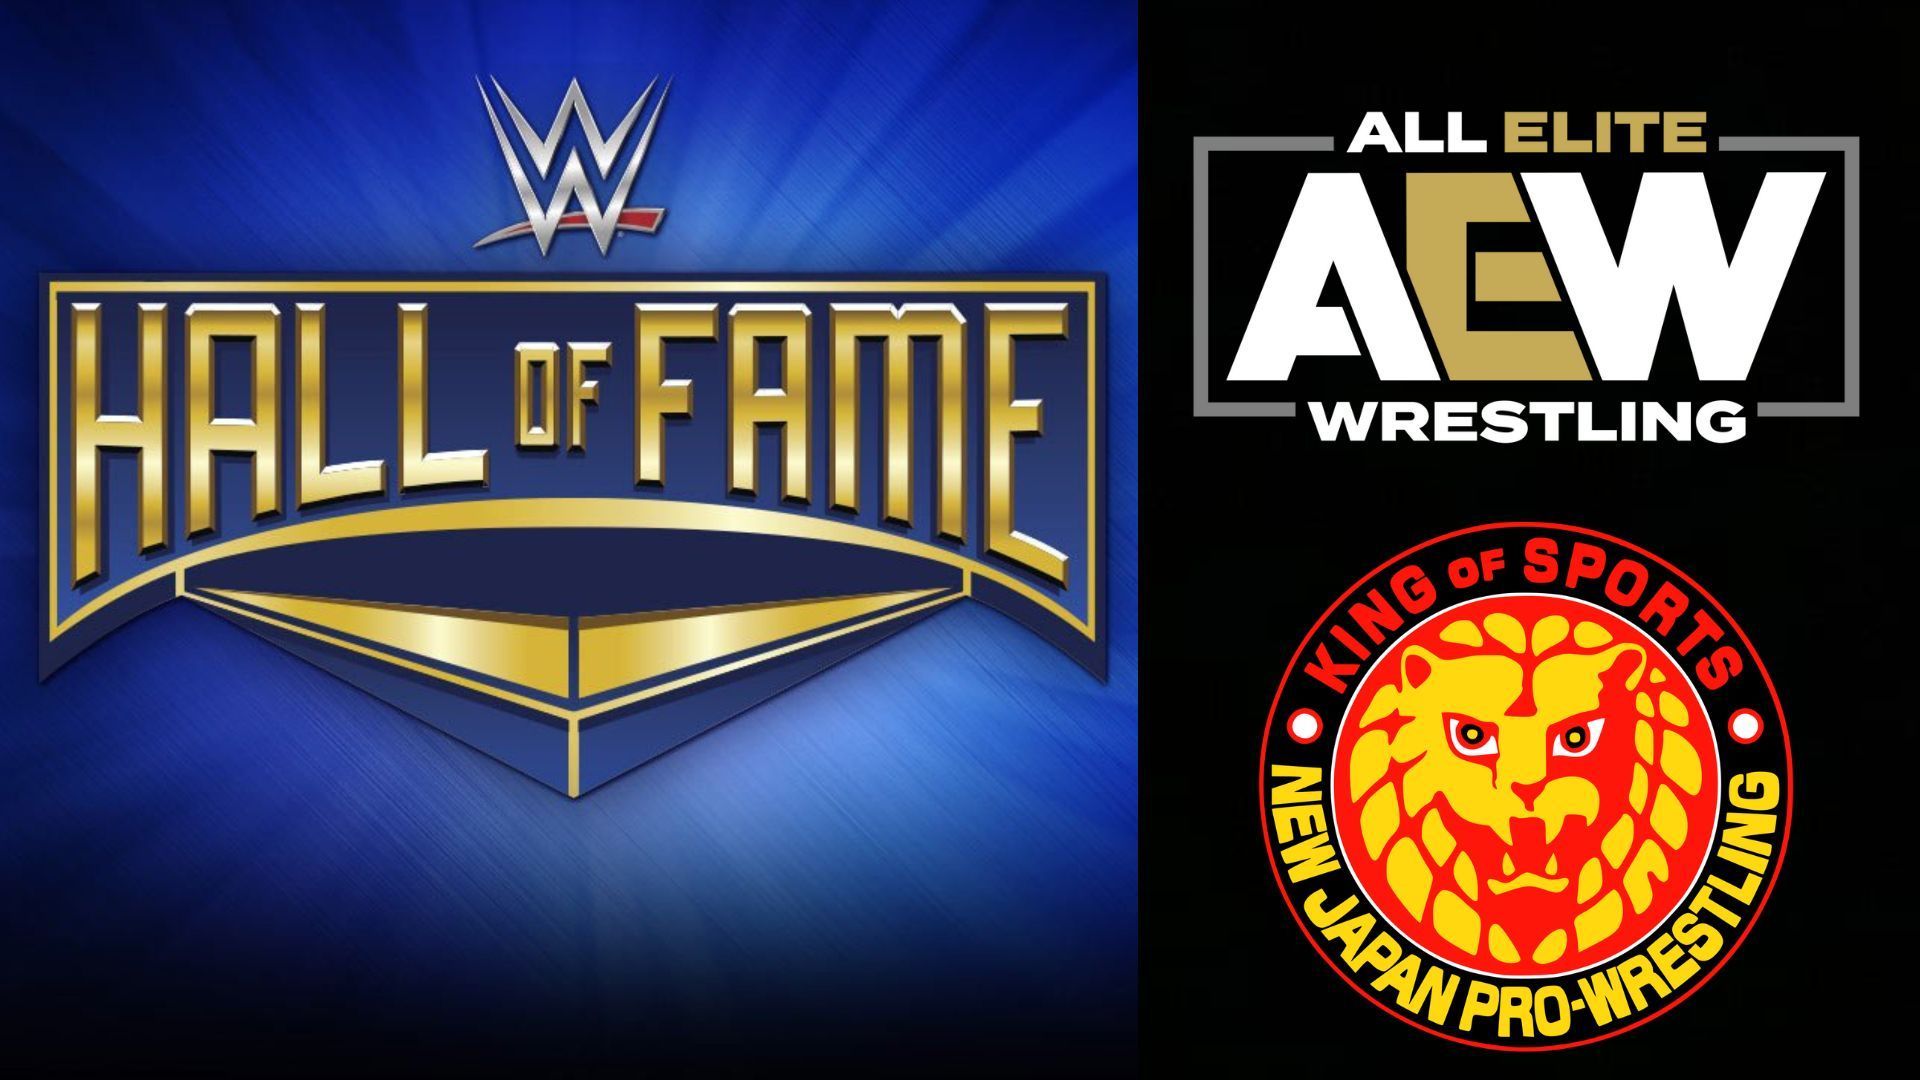 Outside WWE wrestler rumored to be inducted to the Hall of Fame 2023